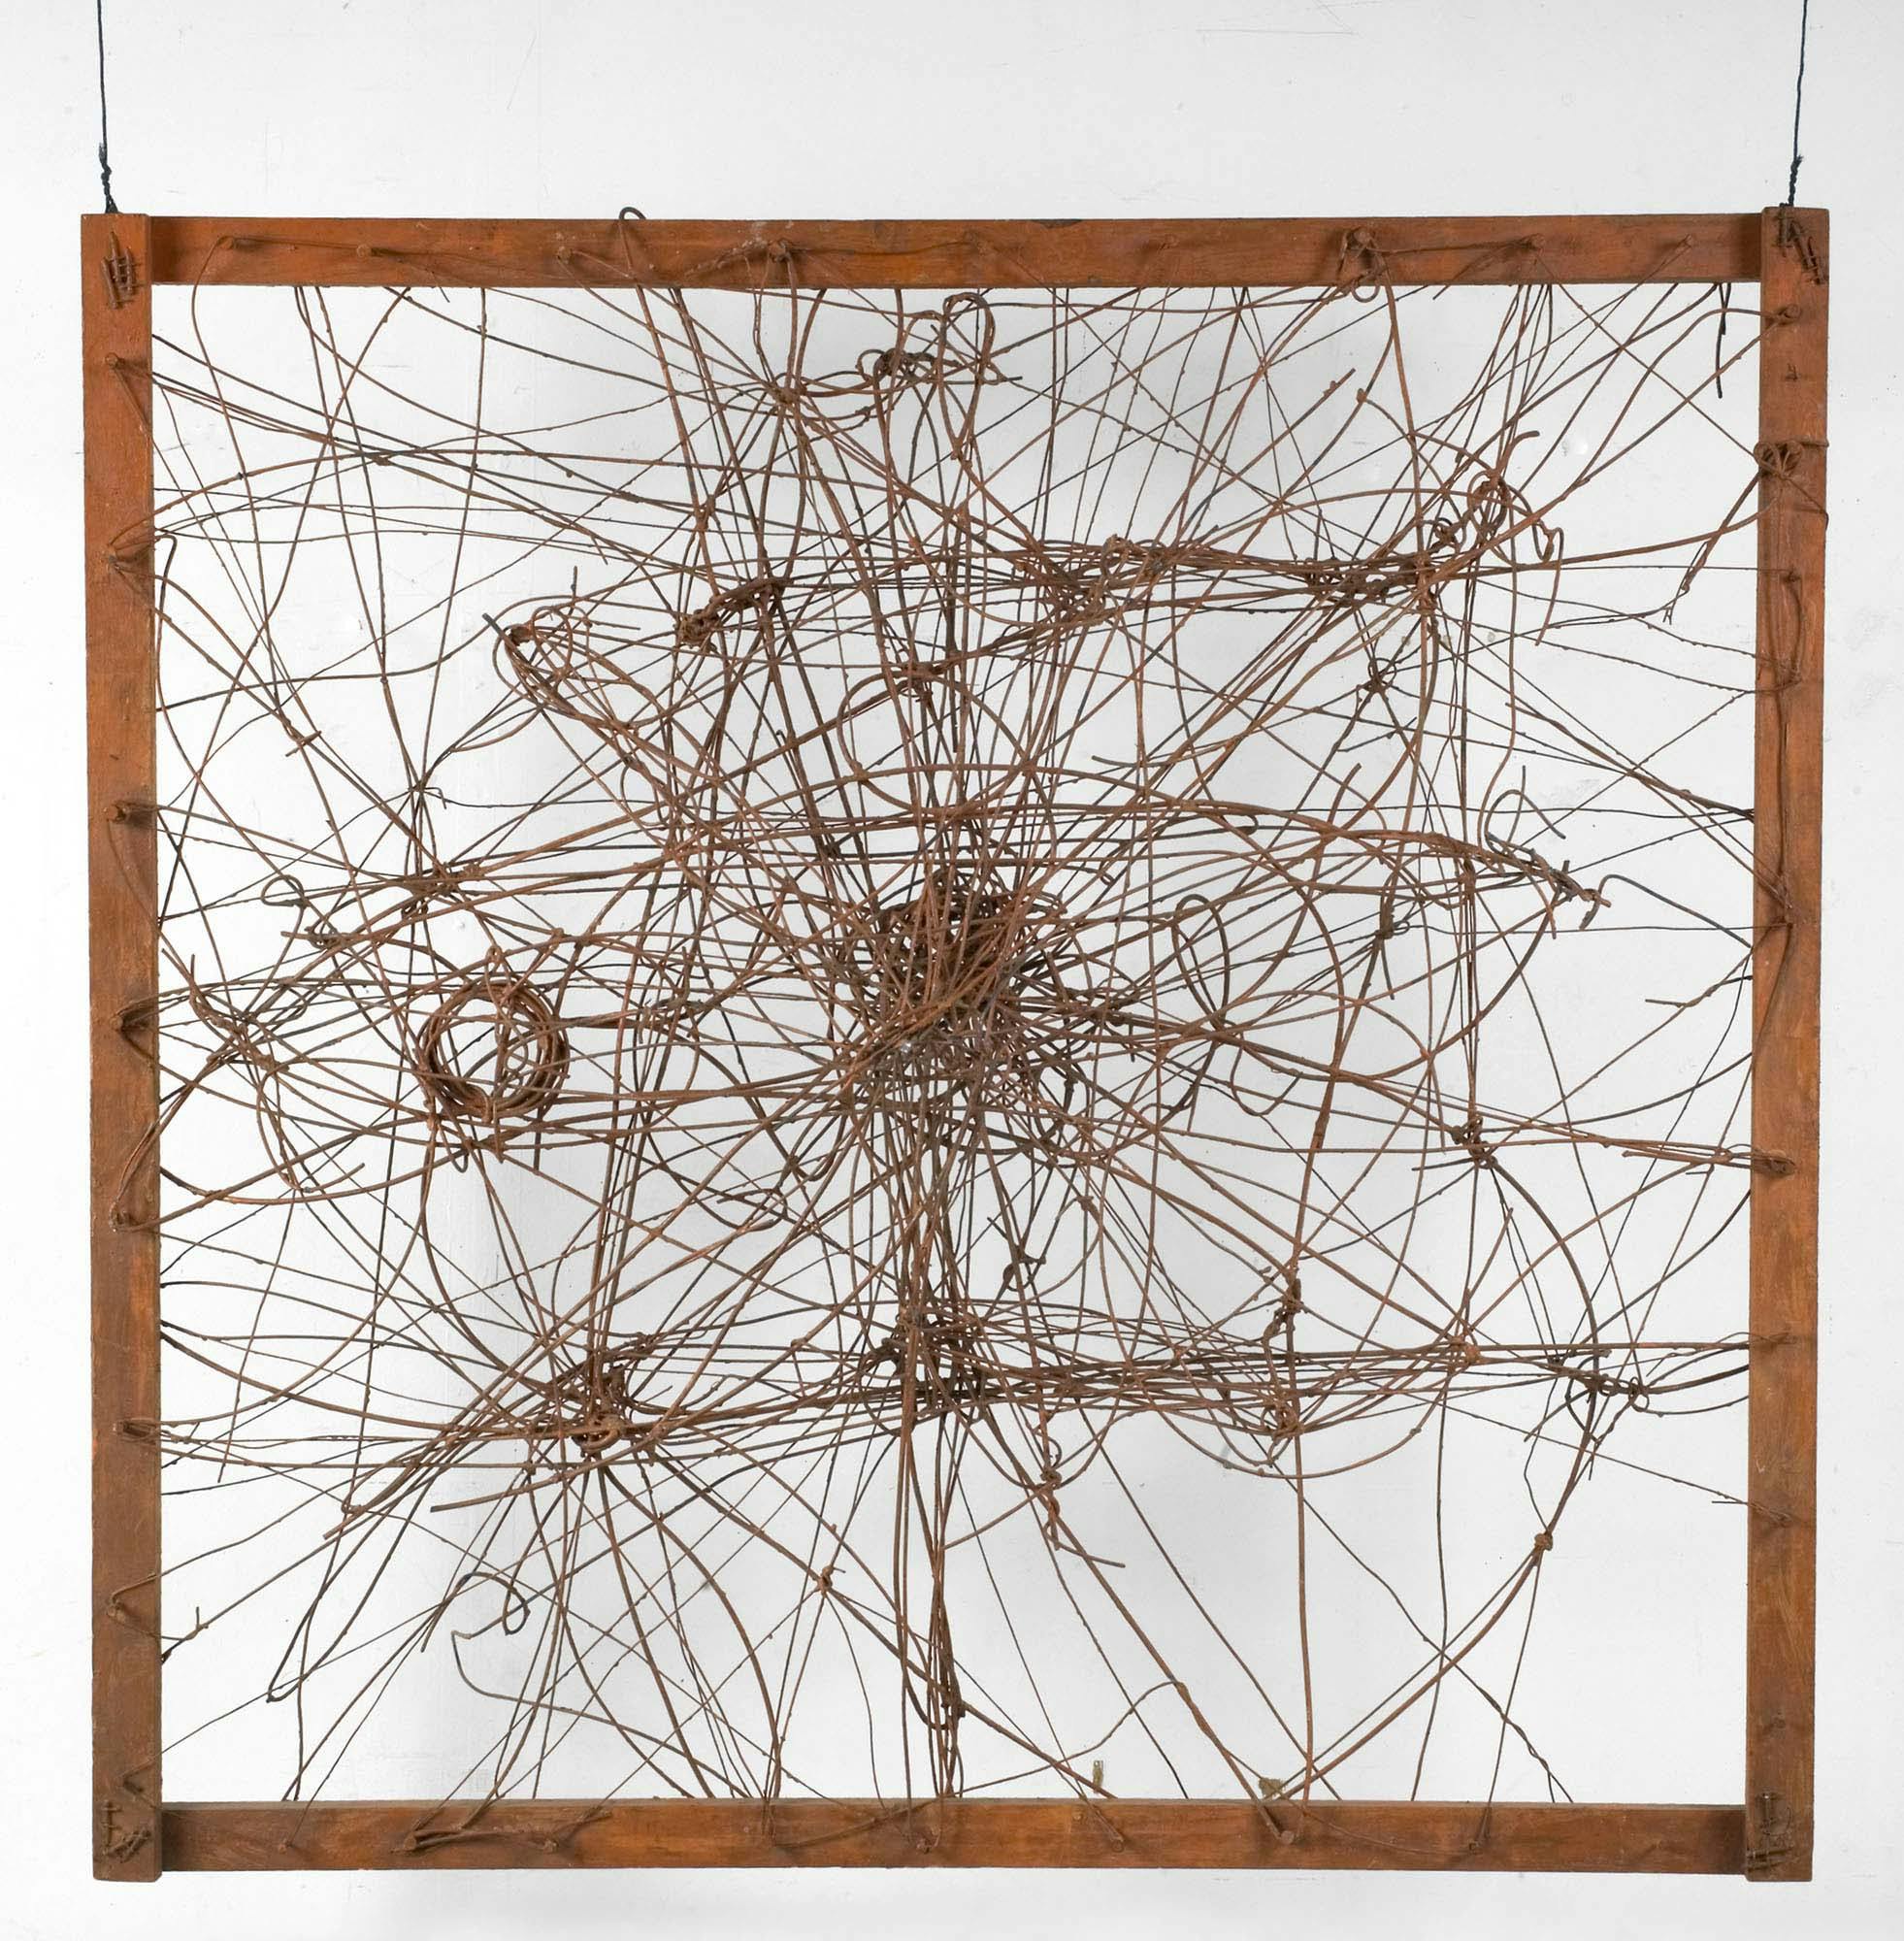 Untitled (The Web and, Wall Sculpture)
1950
Steel wire and wood frame, painted orange
50 x 50 x 18 in. (127 x 127 x 45.7 cm)
 – The Richard Pousette-Dart Foundation